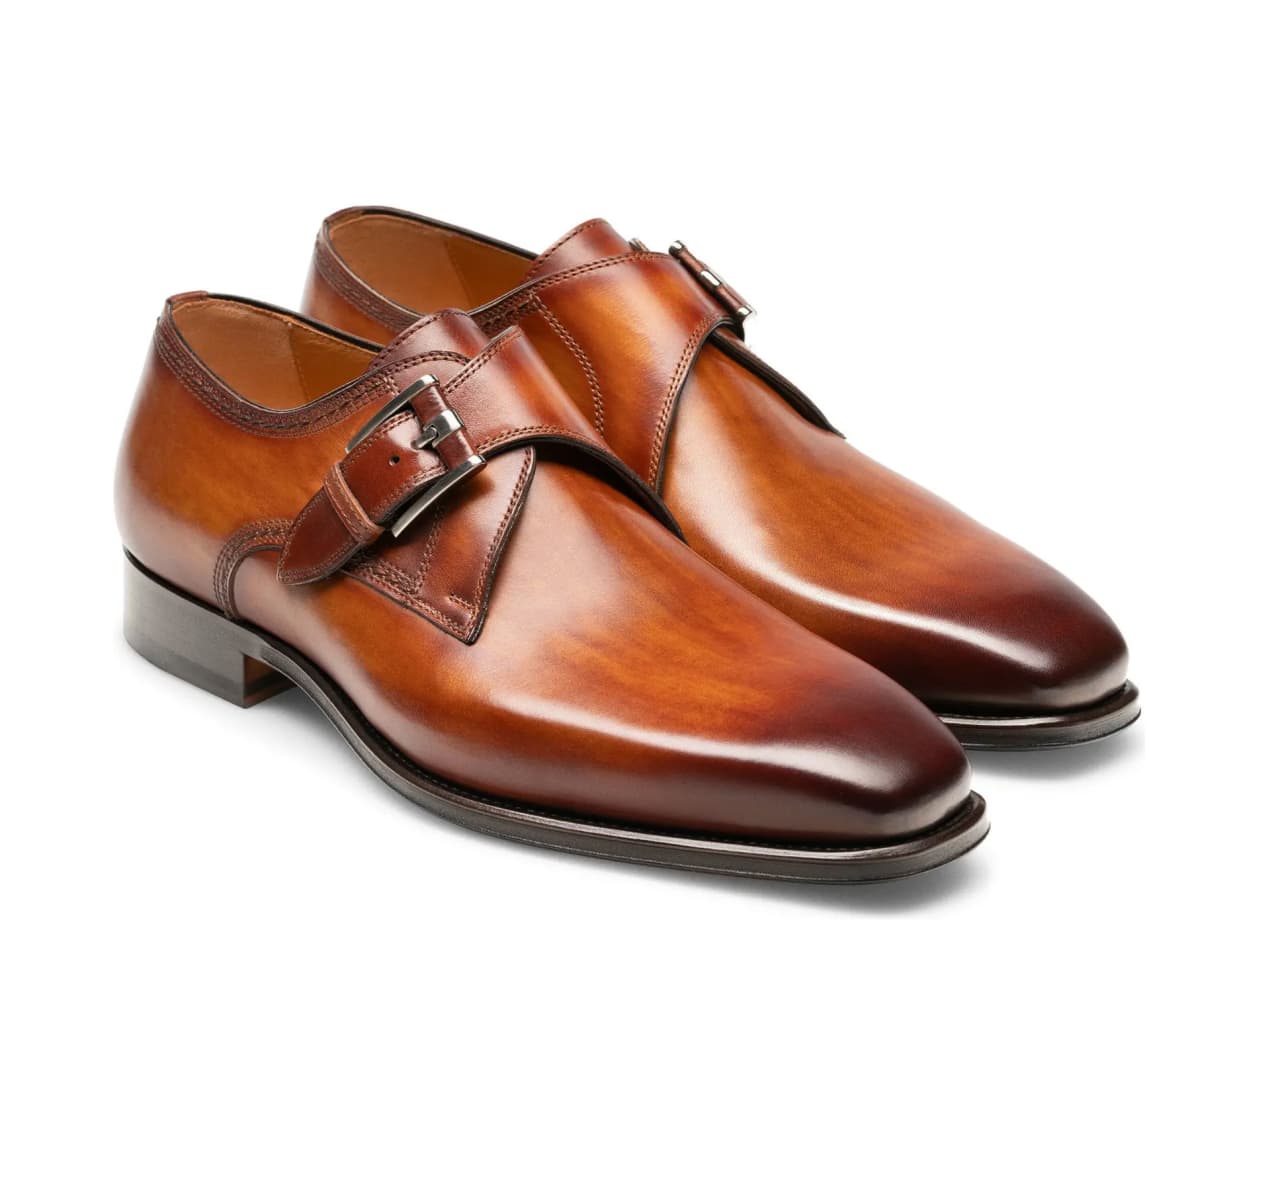 10 of the Best Brown Dress Shoes Guys Can Buy Right Now